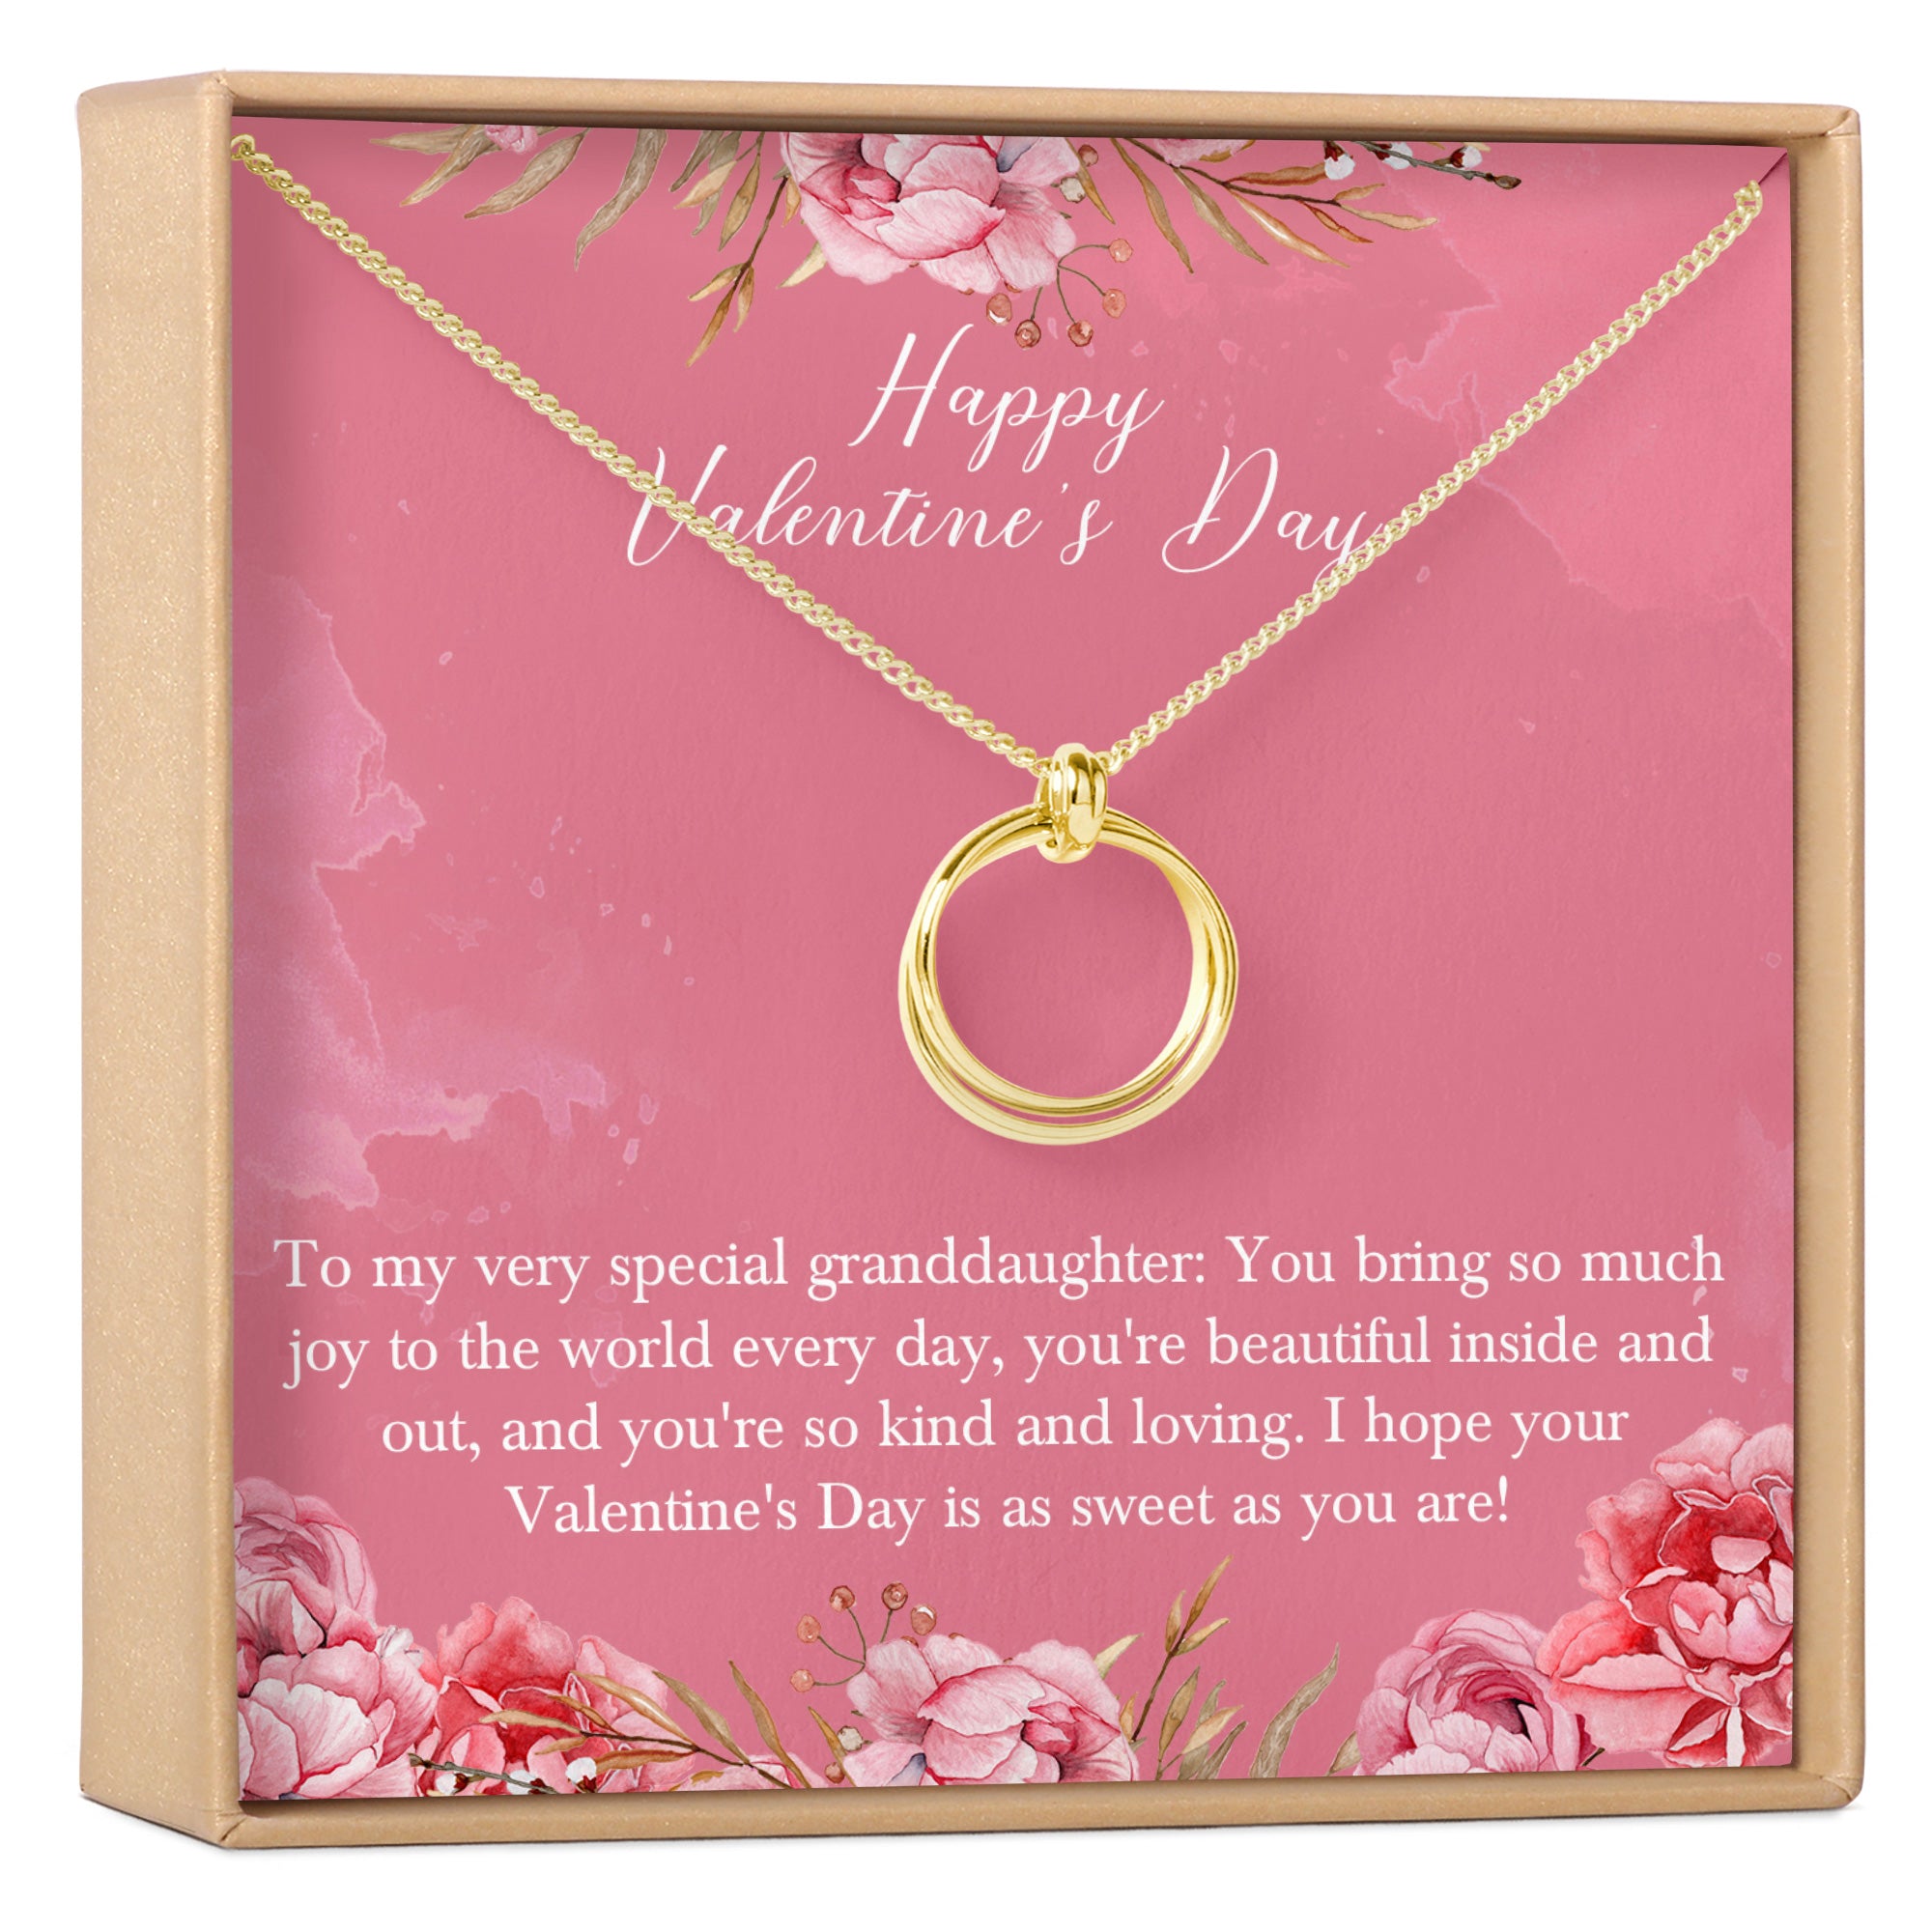 Buy rakva 925 Sterling Silver Granddaughter Necklace, To My Granddaughter  Necklace Gift Infinity Heart Necklace at Amazon.in